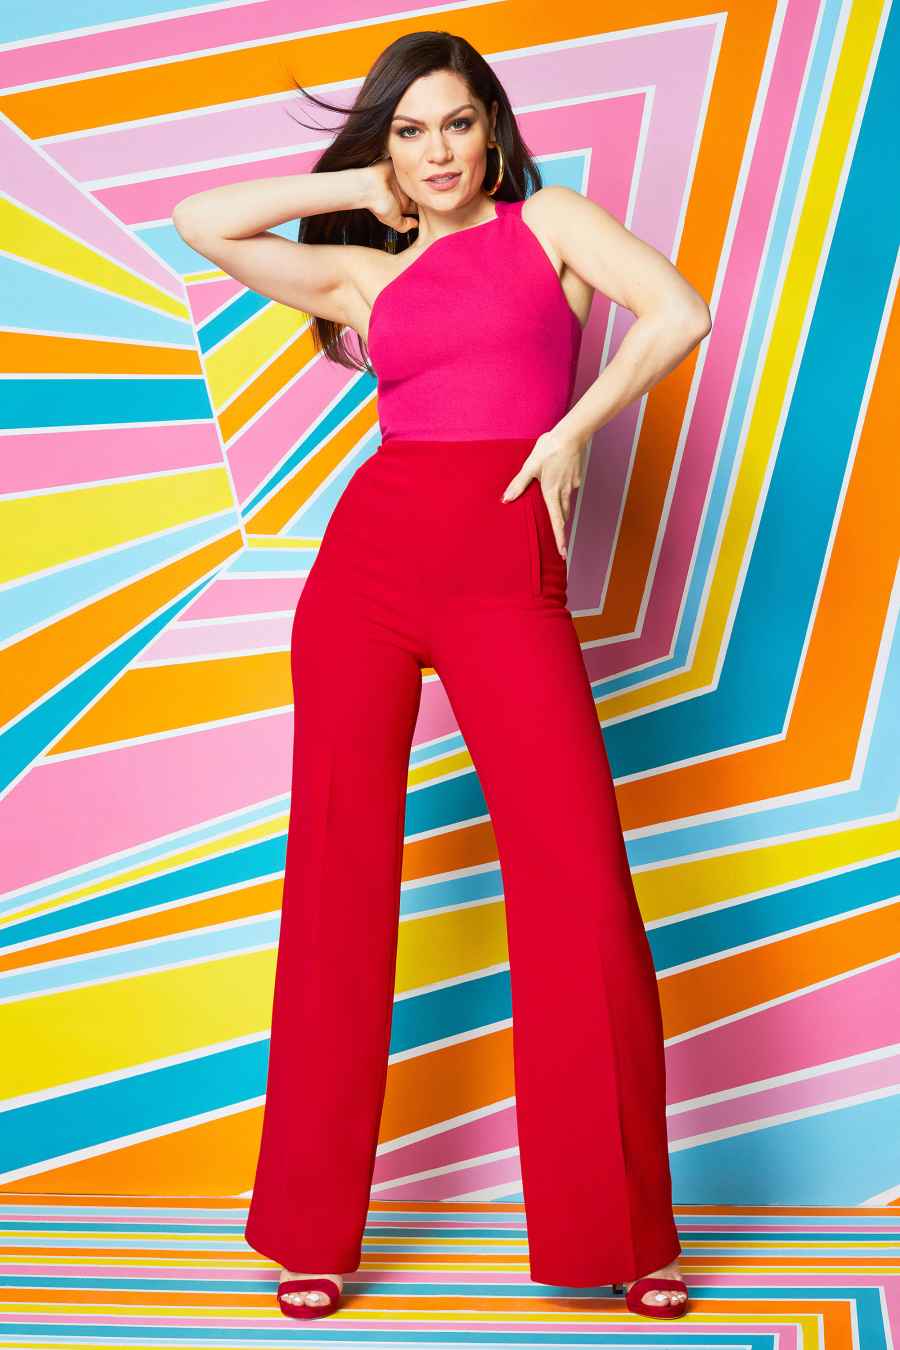 Celebs Wearing Red and Pink - Jessie J